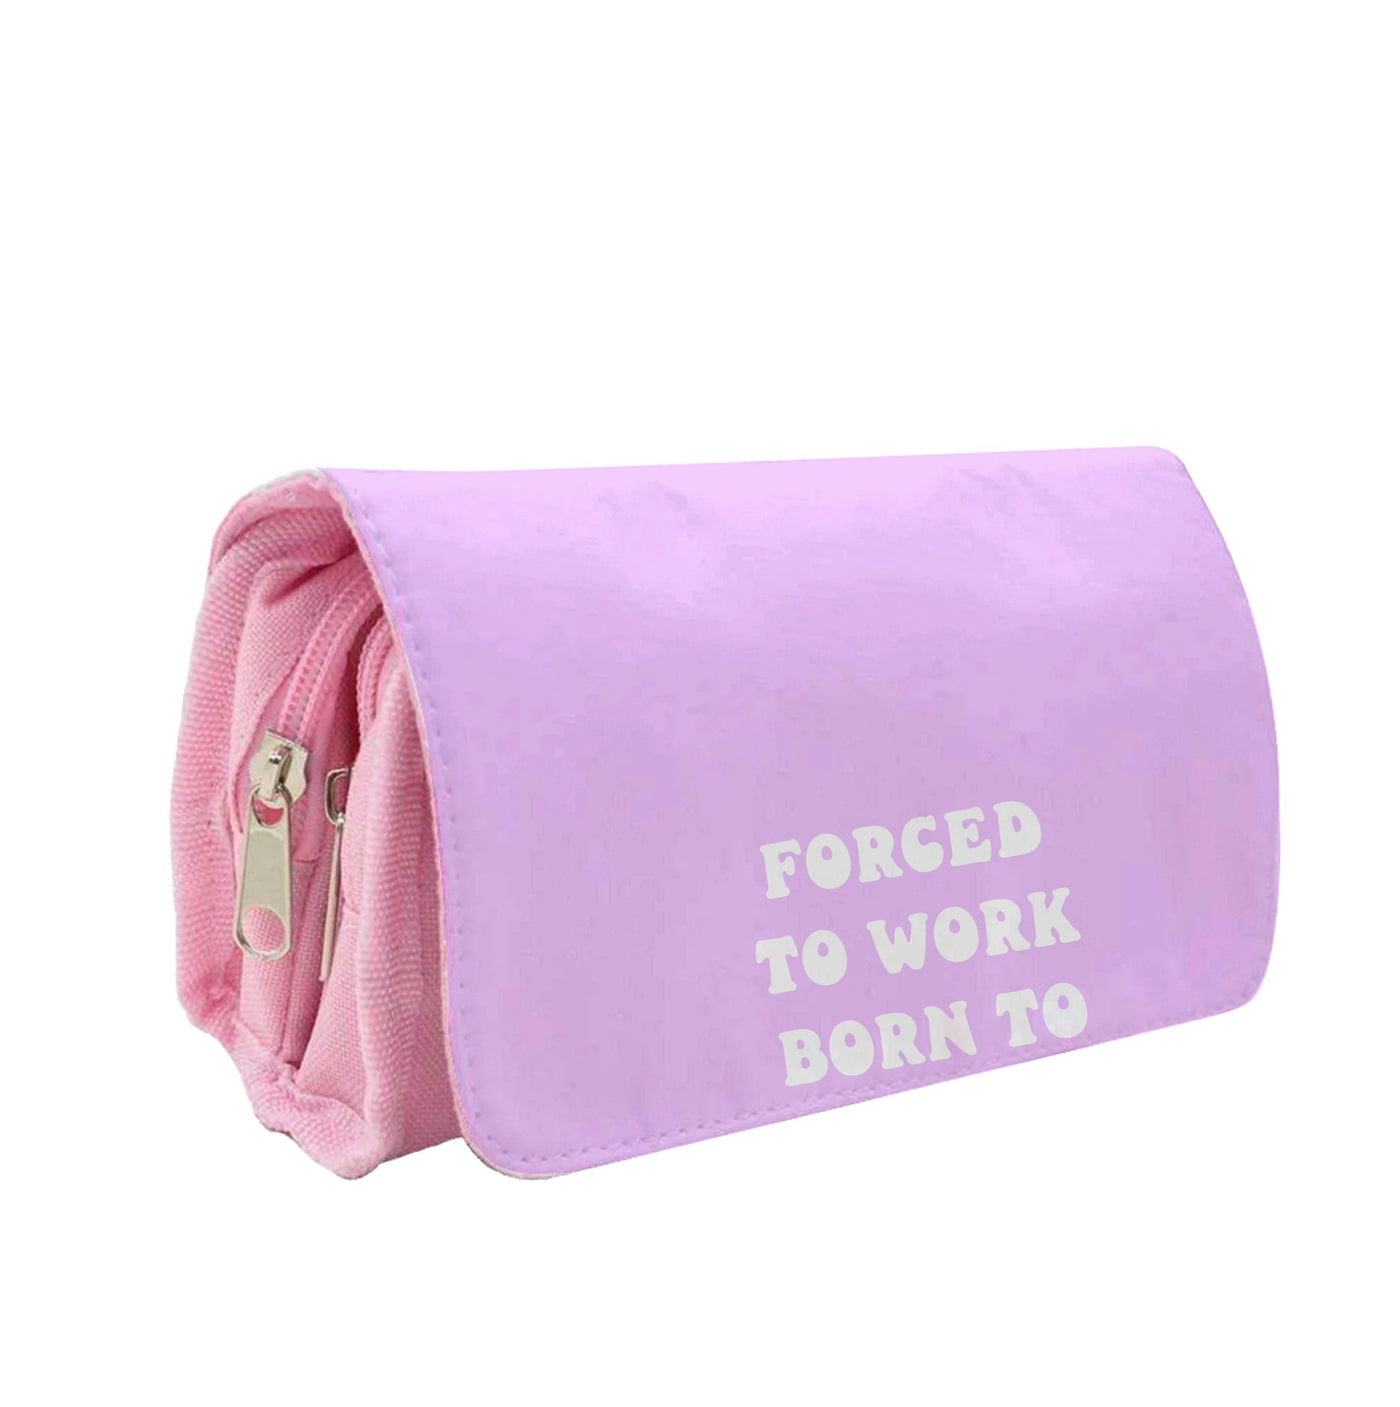 Forced To Work Born To Travel - Travel Pencil Case